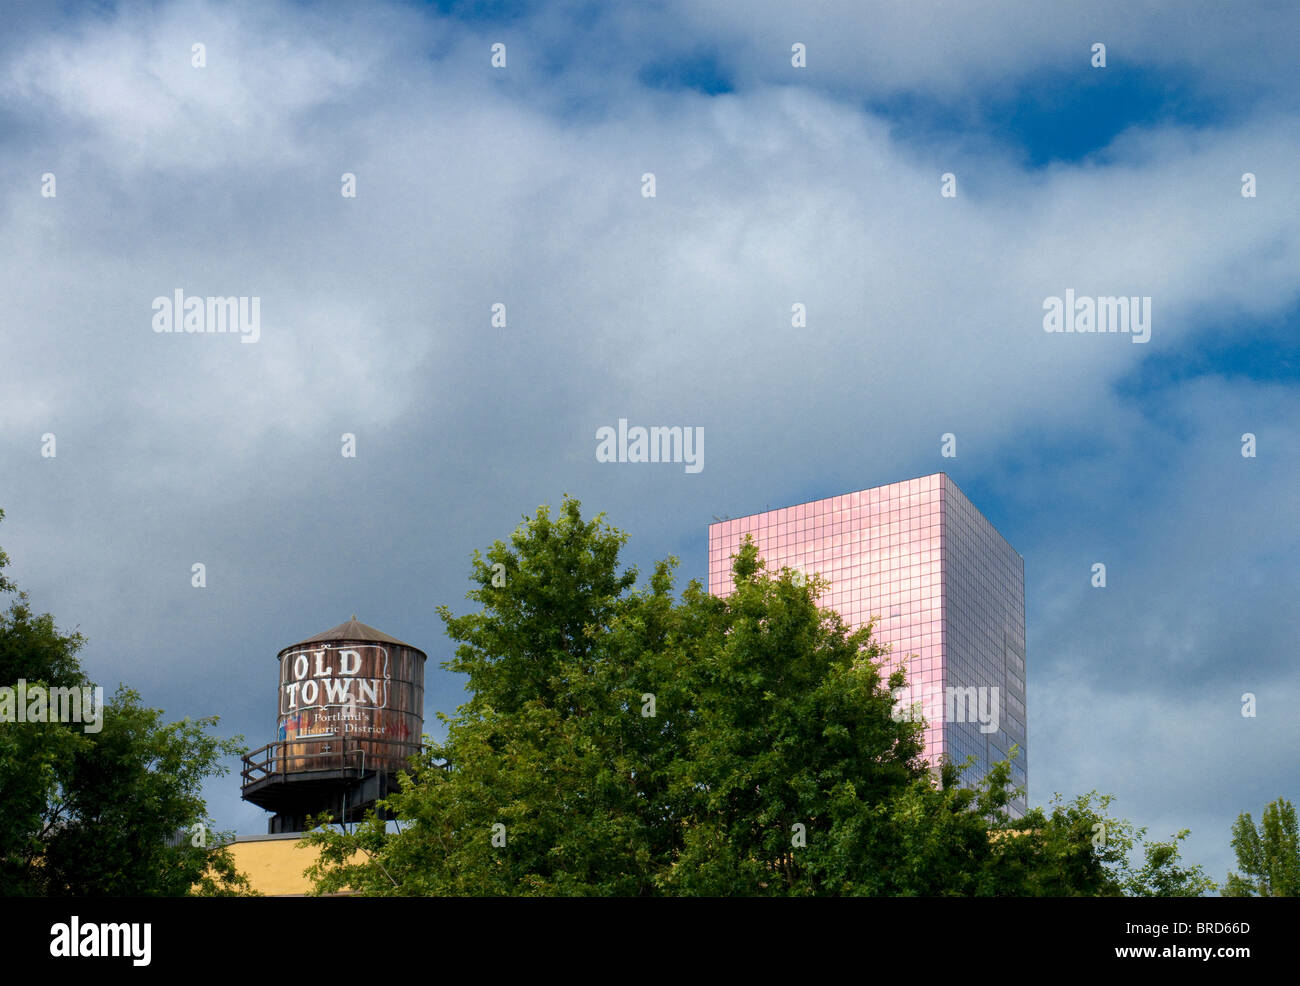 Portland, Oregon skyline with Old Town tower. Stock Photo